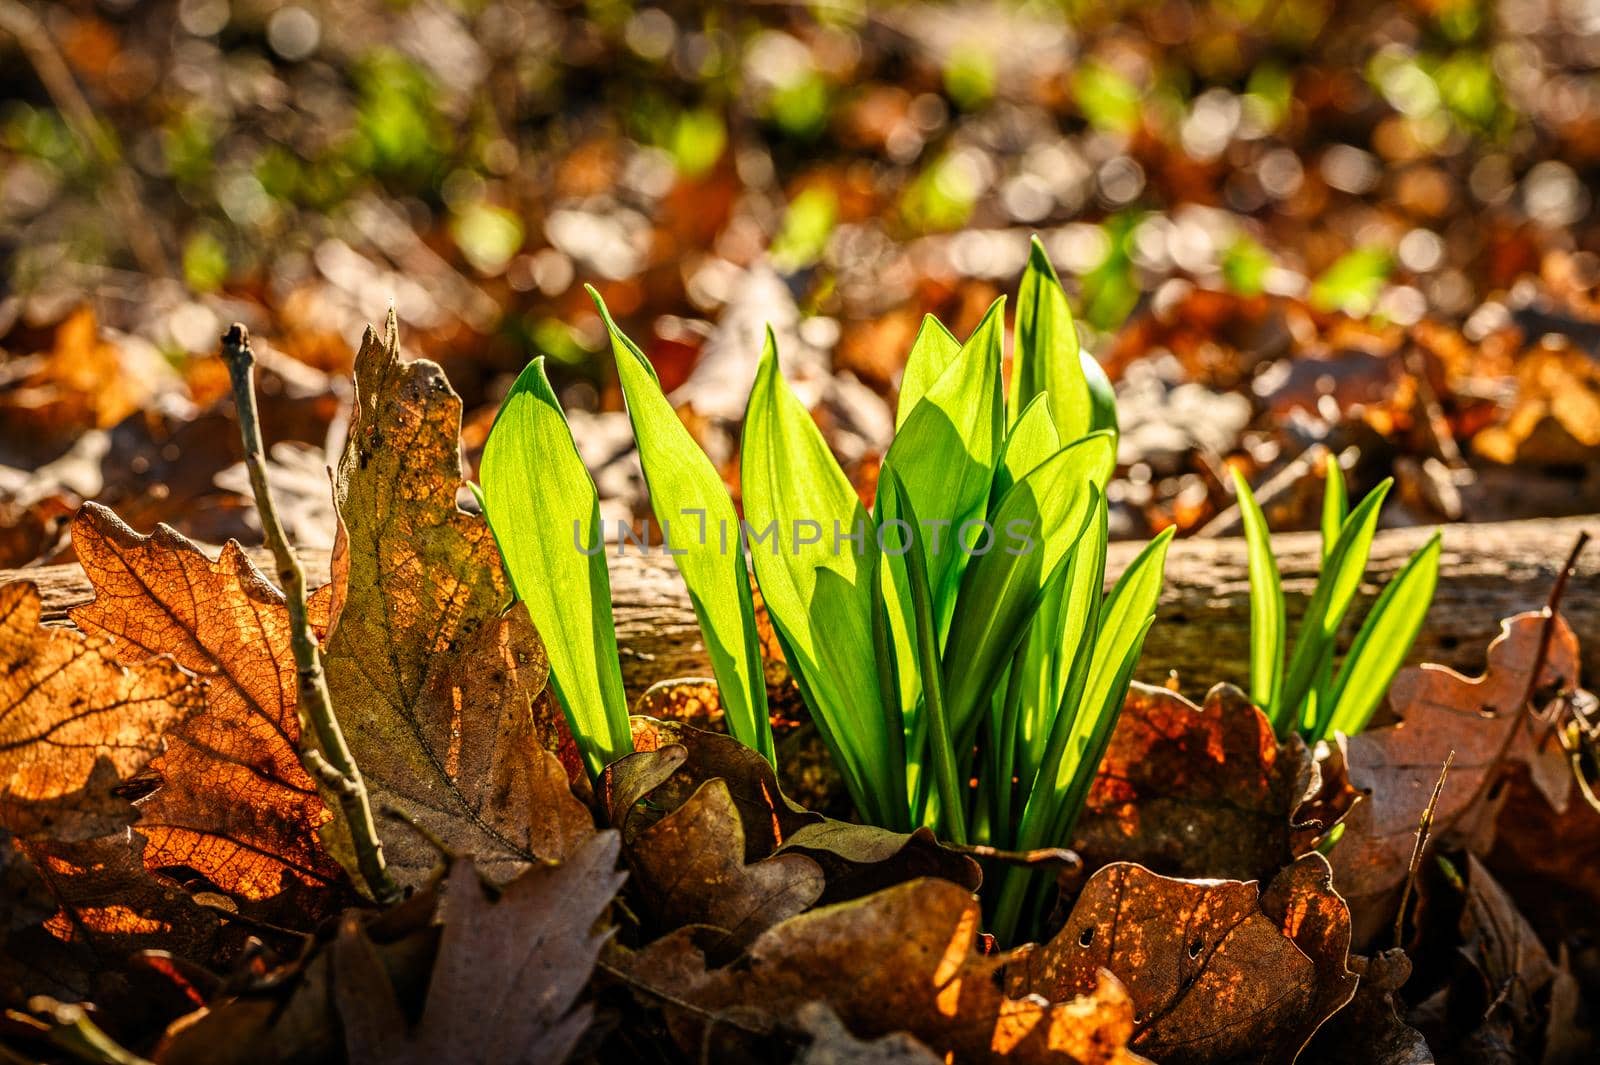 Fresh young wild garlic sprouts from the ground of a sun-drenched forest.